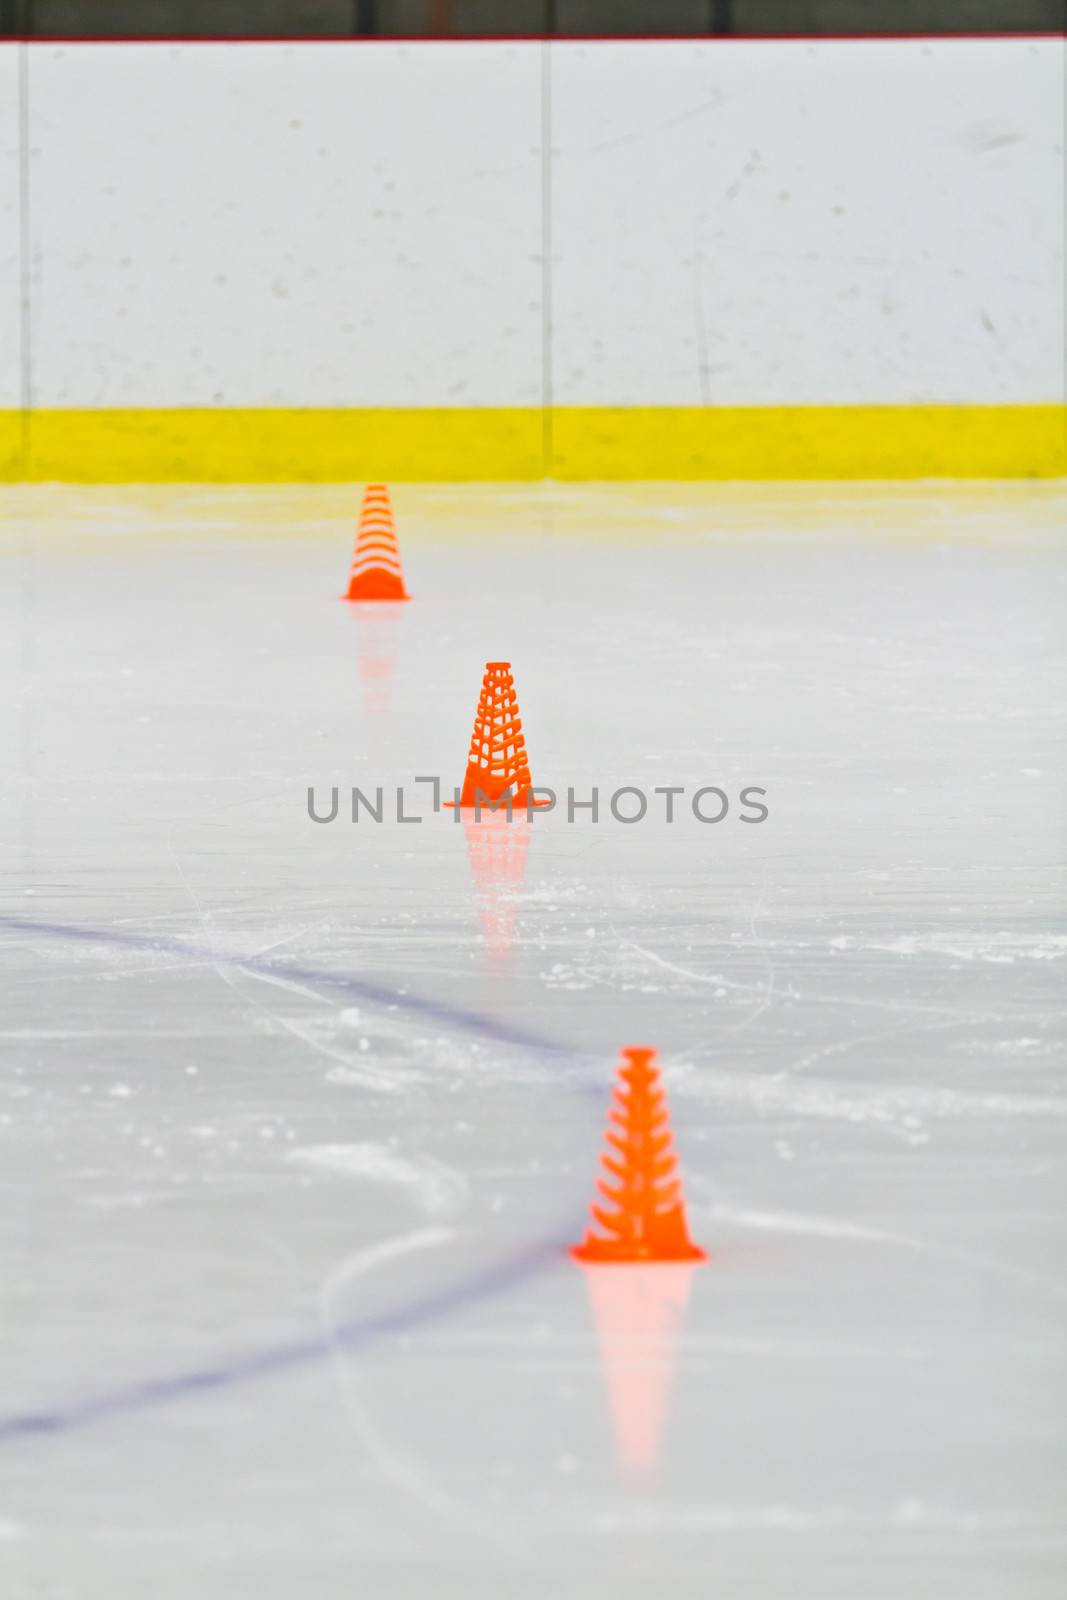 Pylons on the ice in an arena by bigjohn36